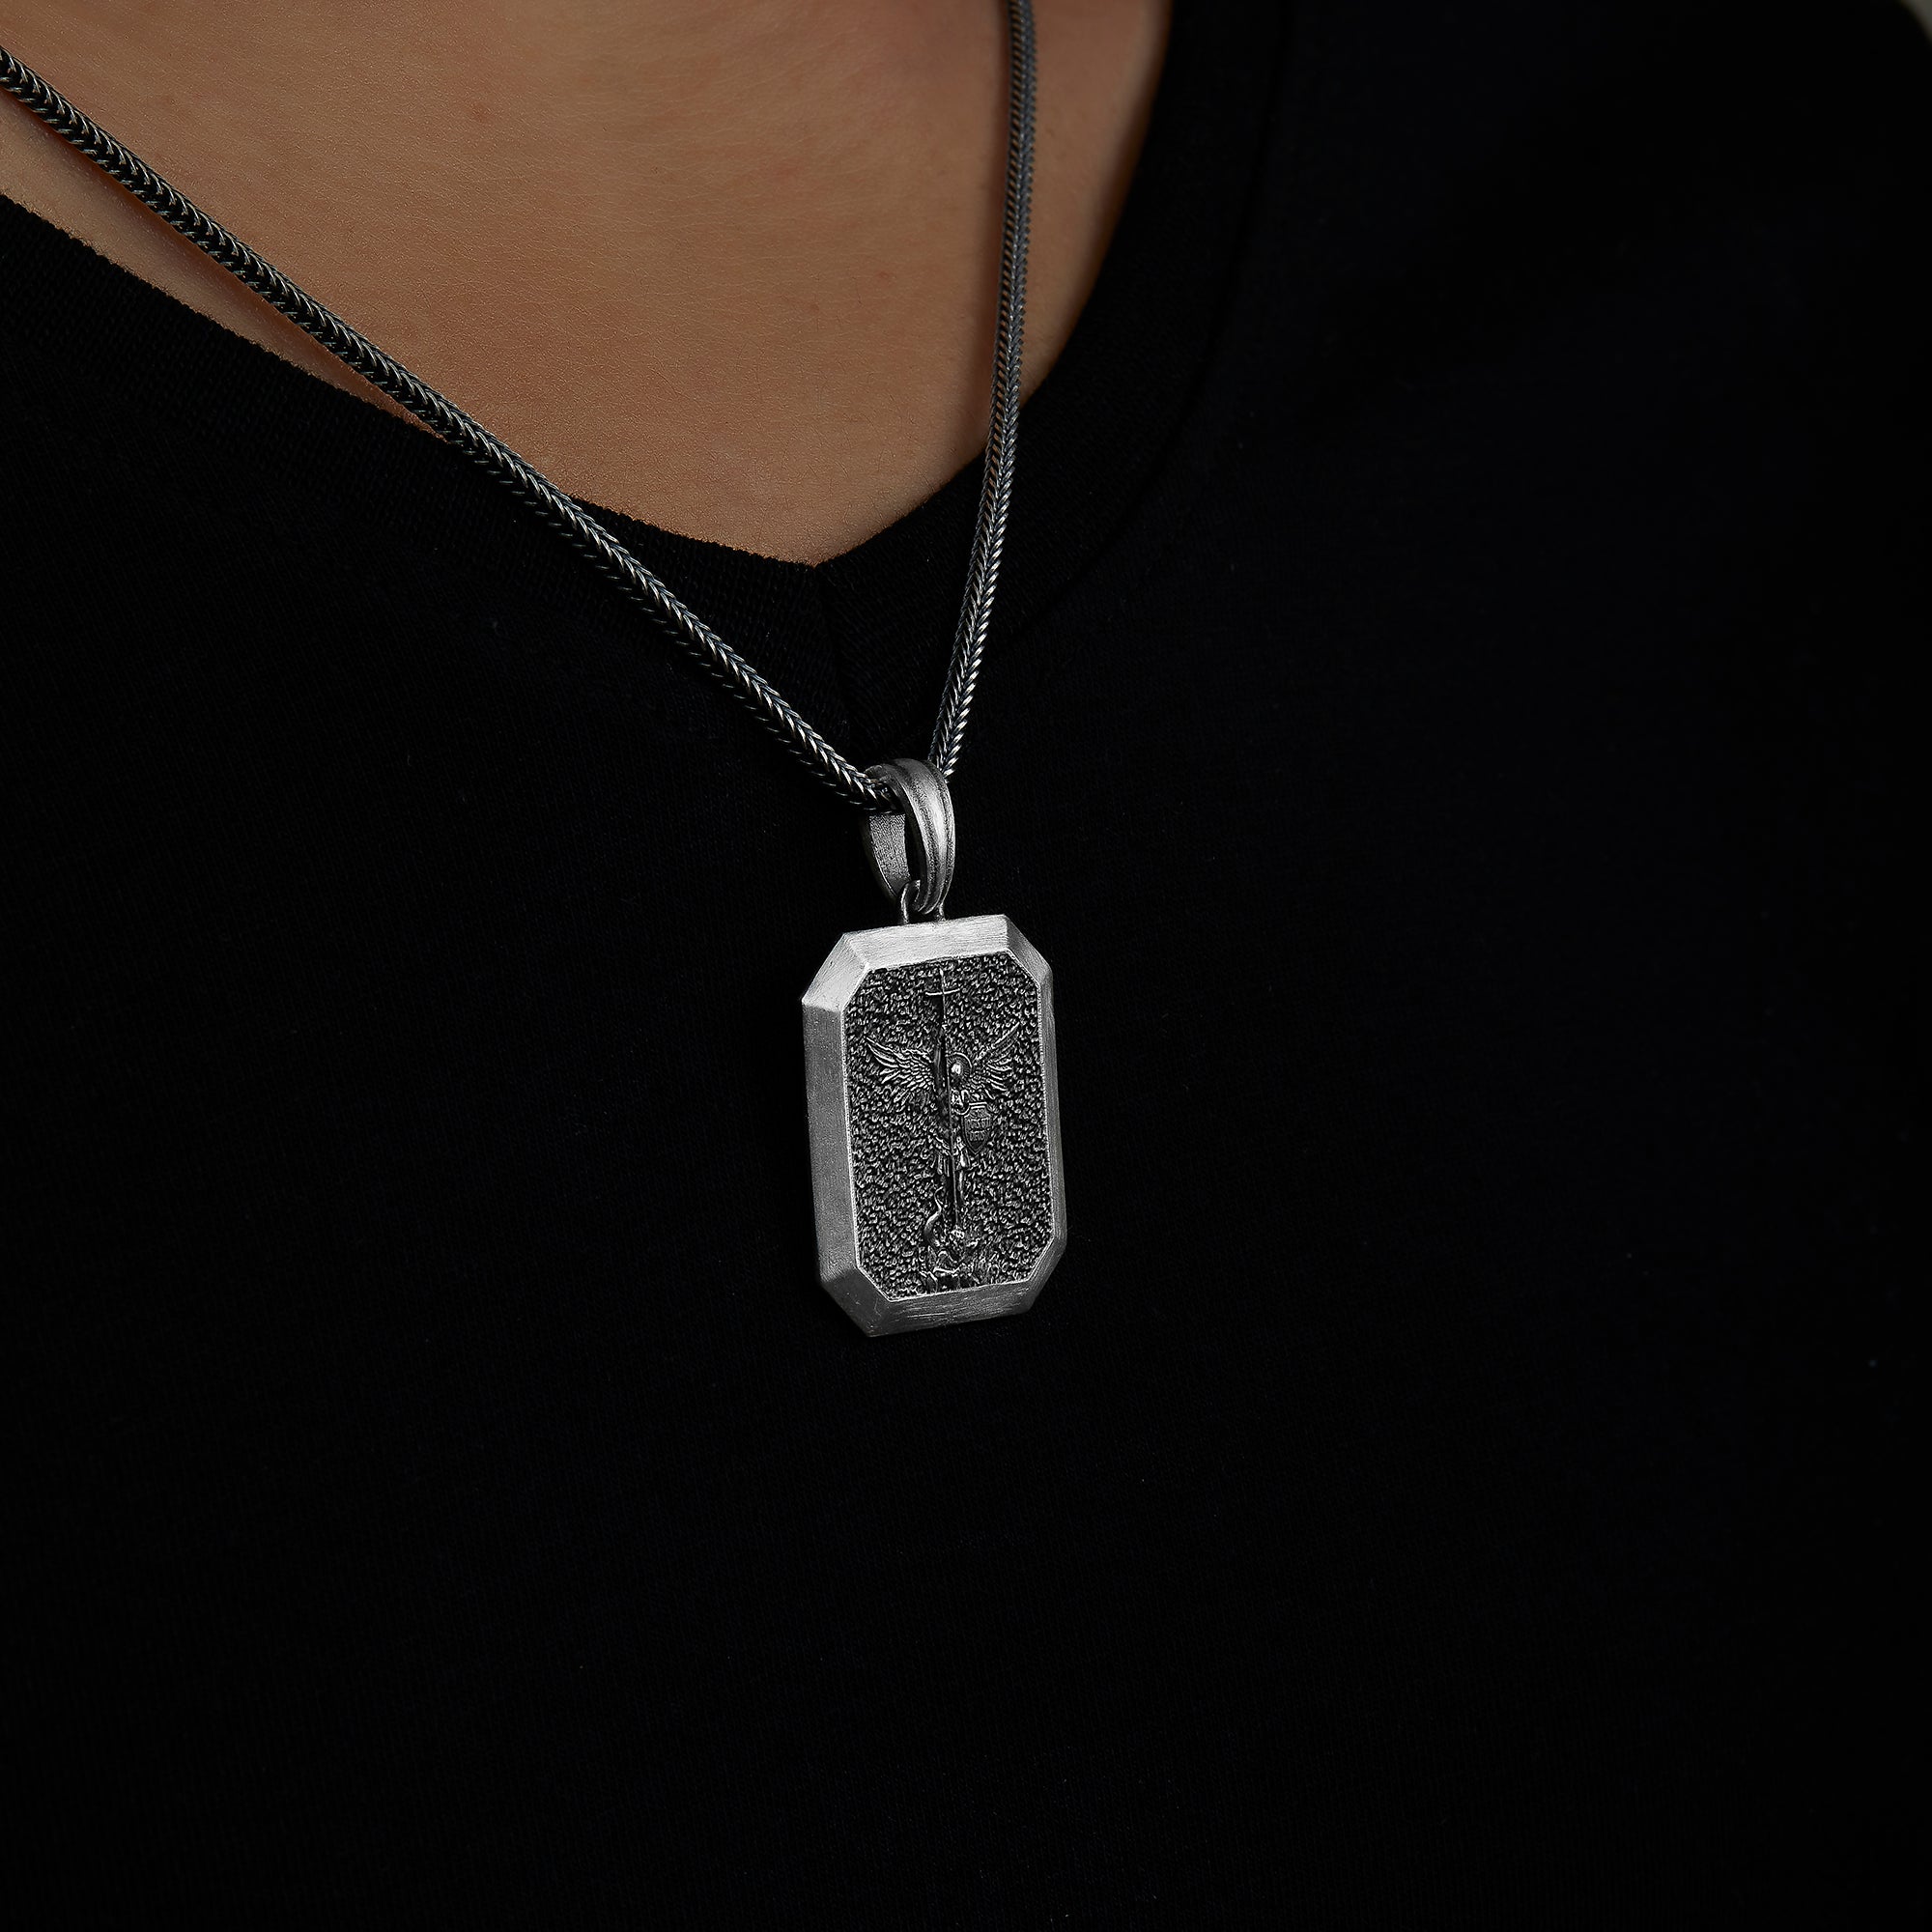 handmade sterling silver Saint Michael Shield Necklace on the neck preview